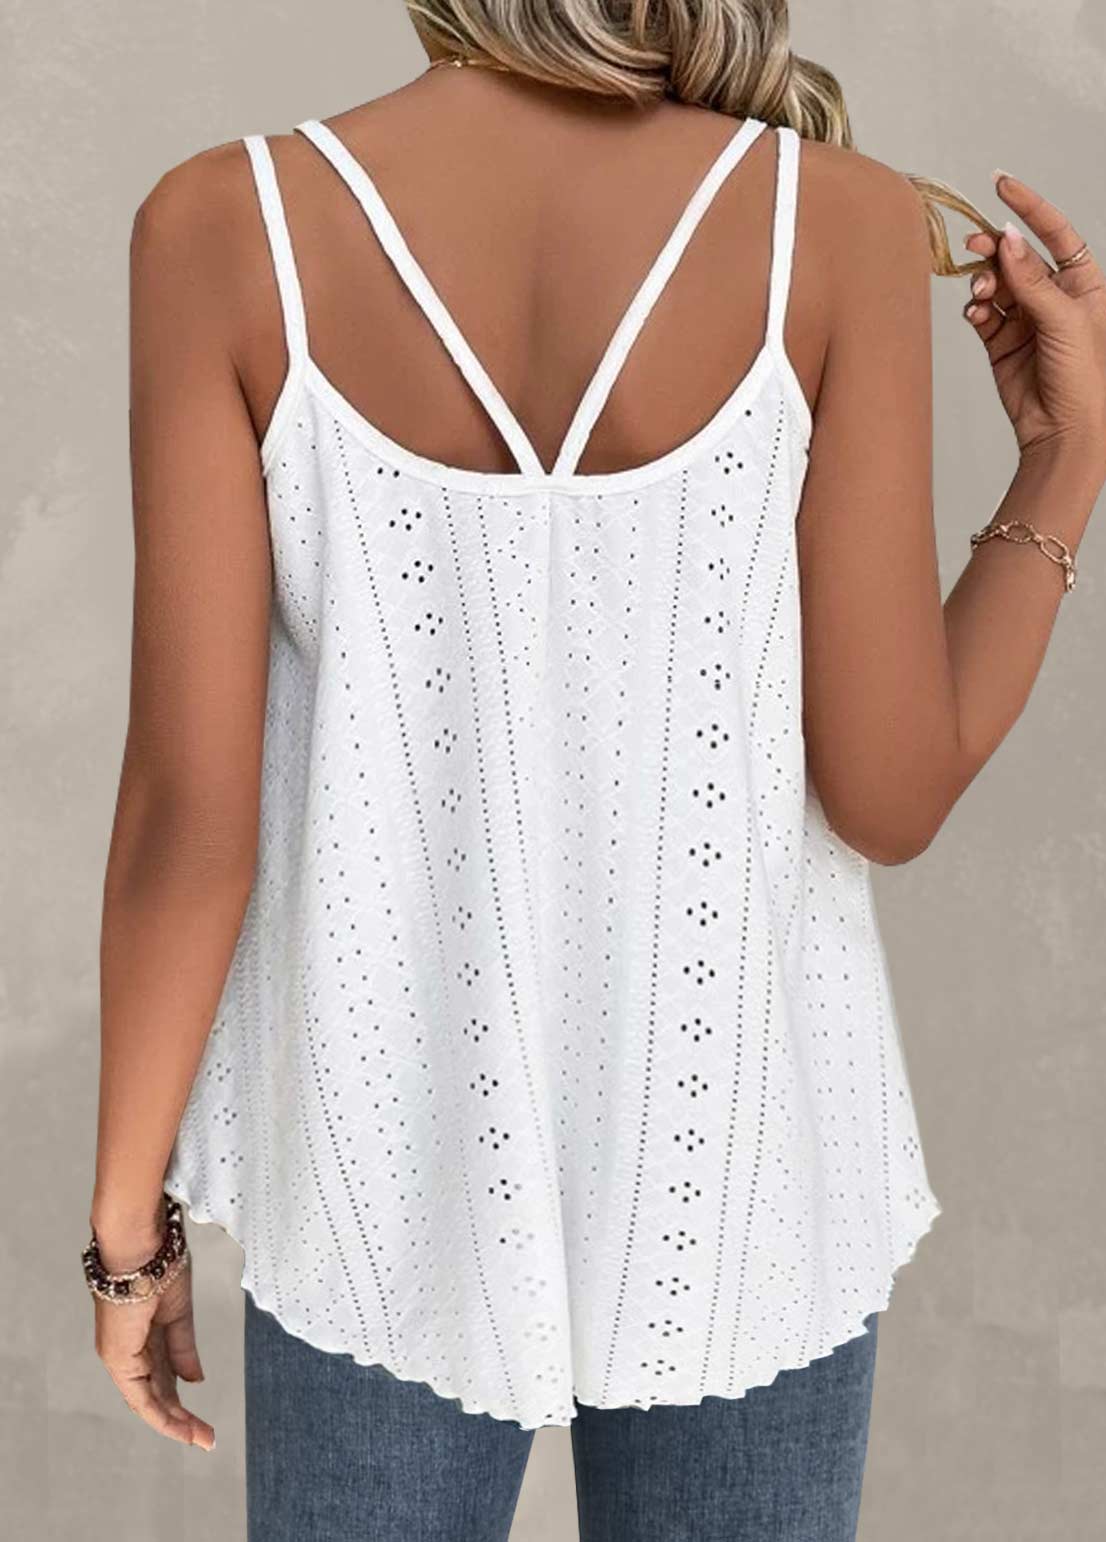 White Hole Scoop Neck Camisole Top